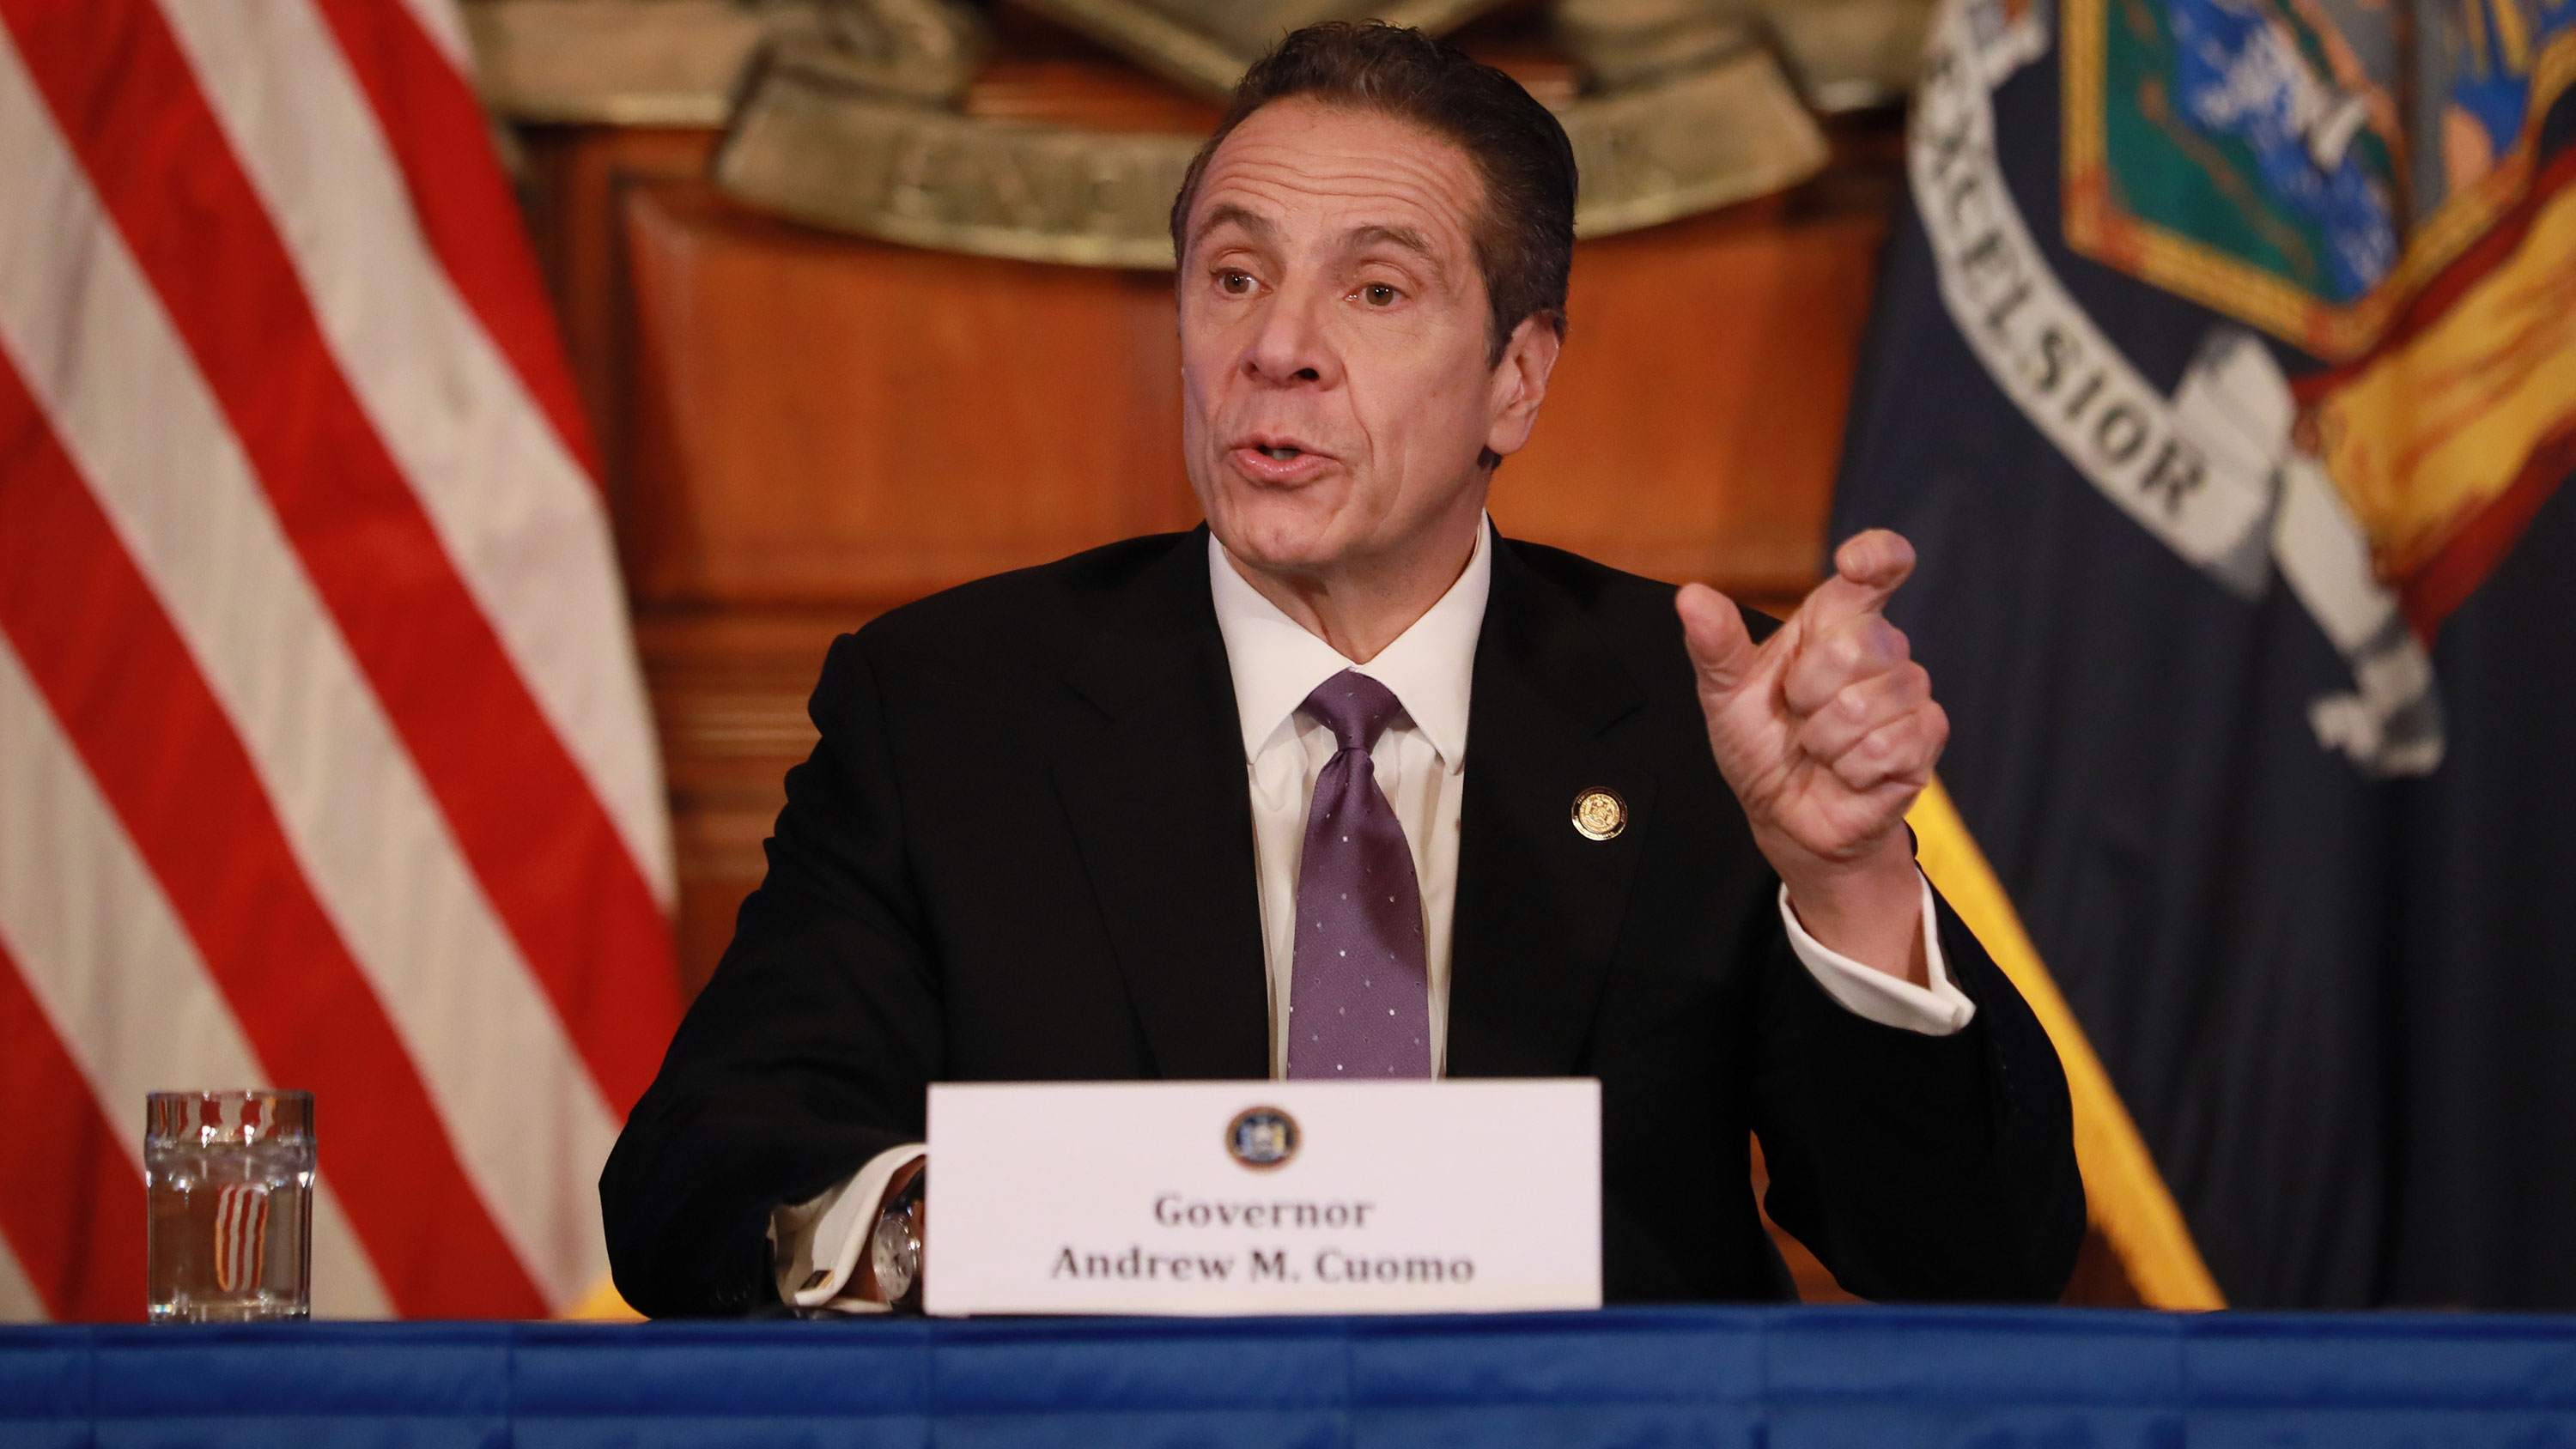 New York Governor Andrew Cuomo at a press conference on April 17.